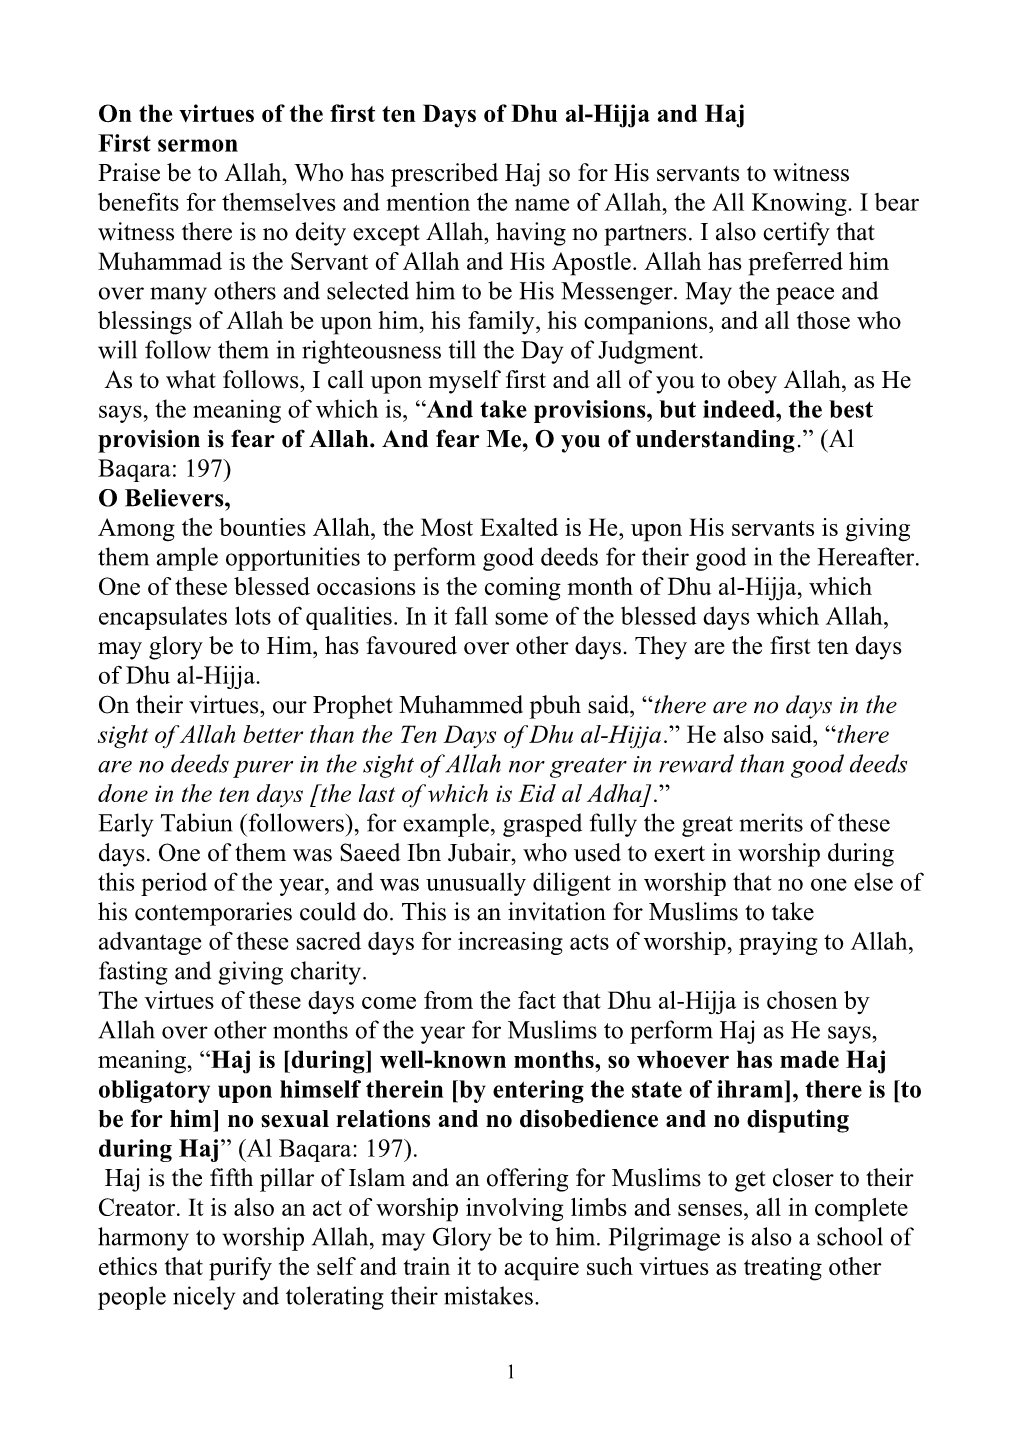 On the Virtues of the First Ten Days of Dhu Al-Hijja and Haj